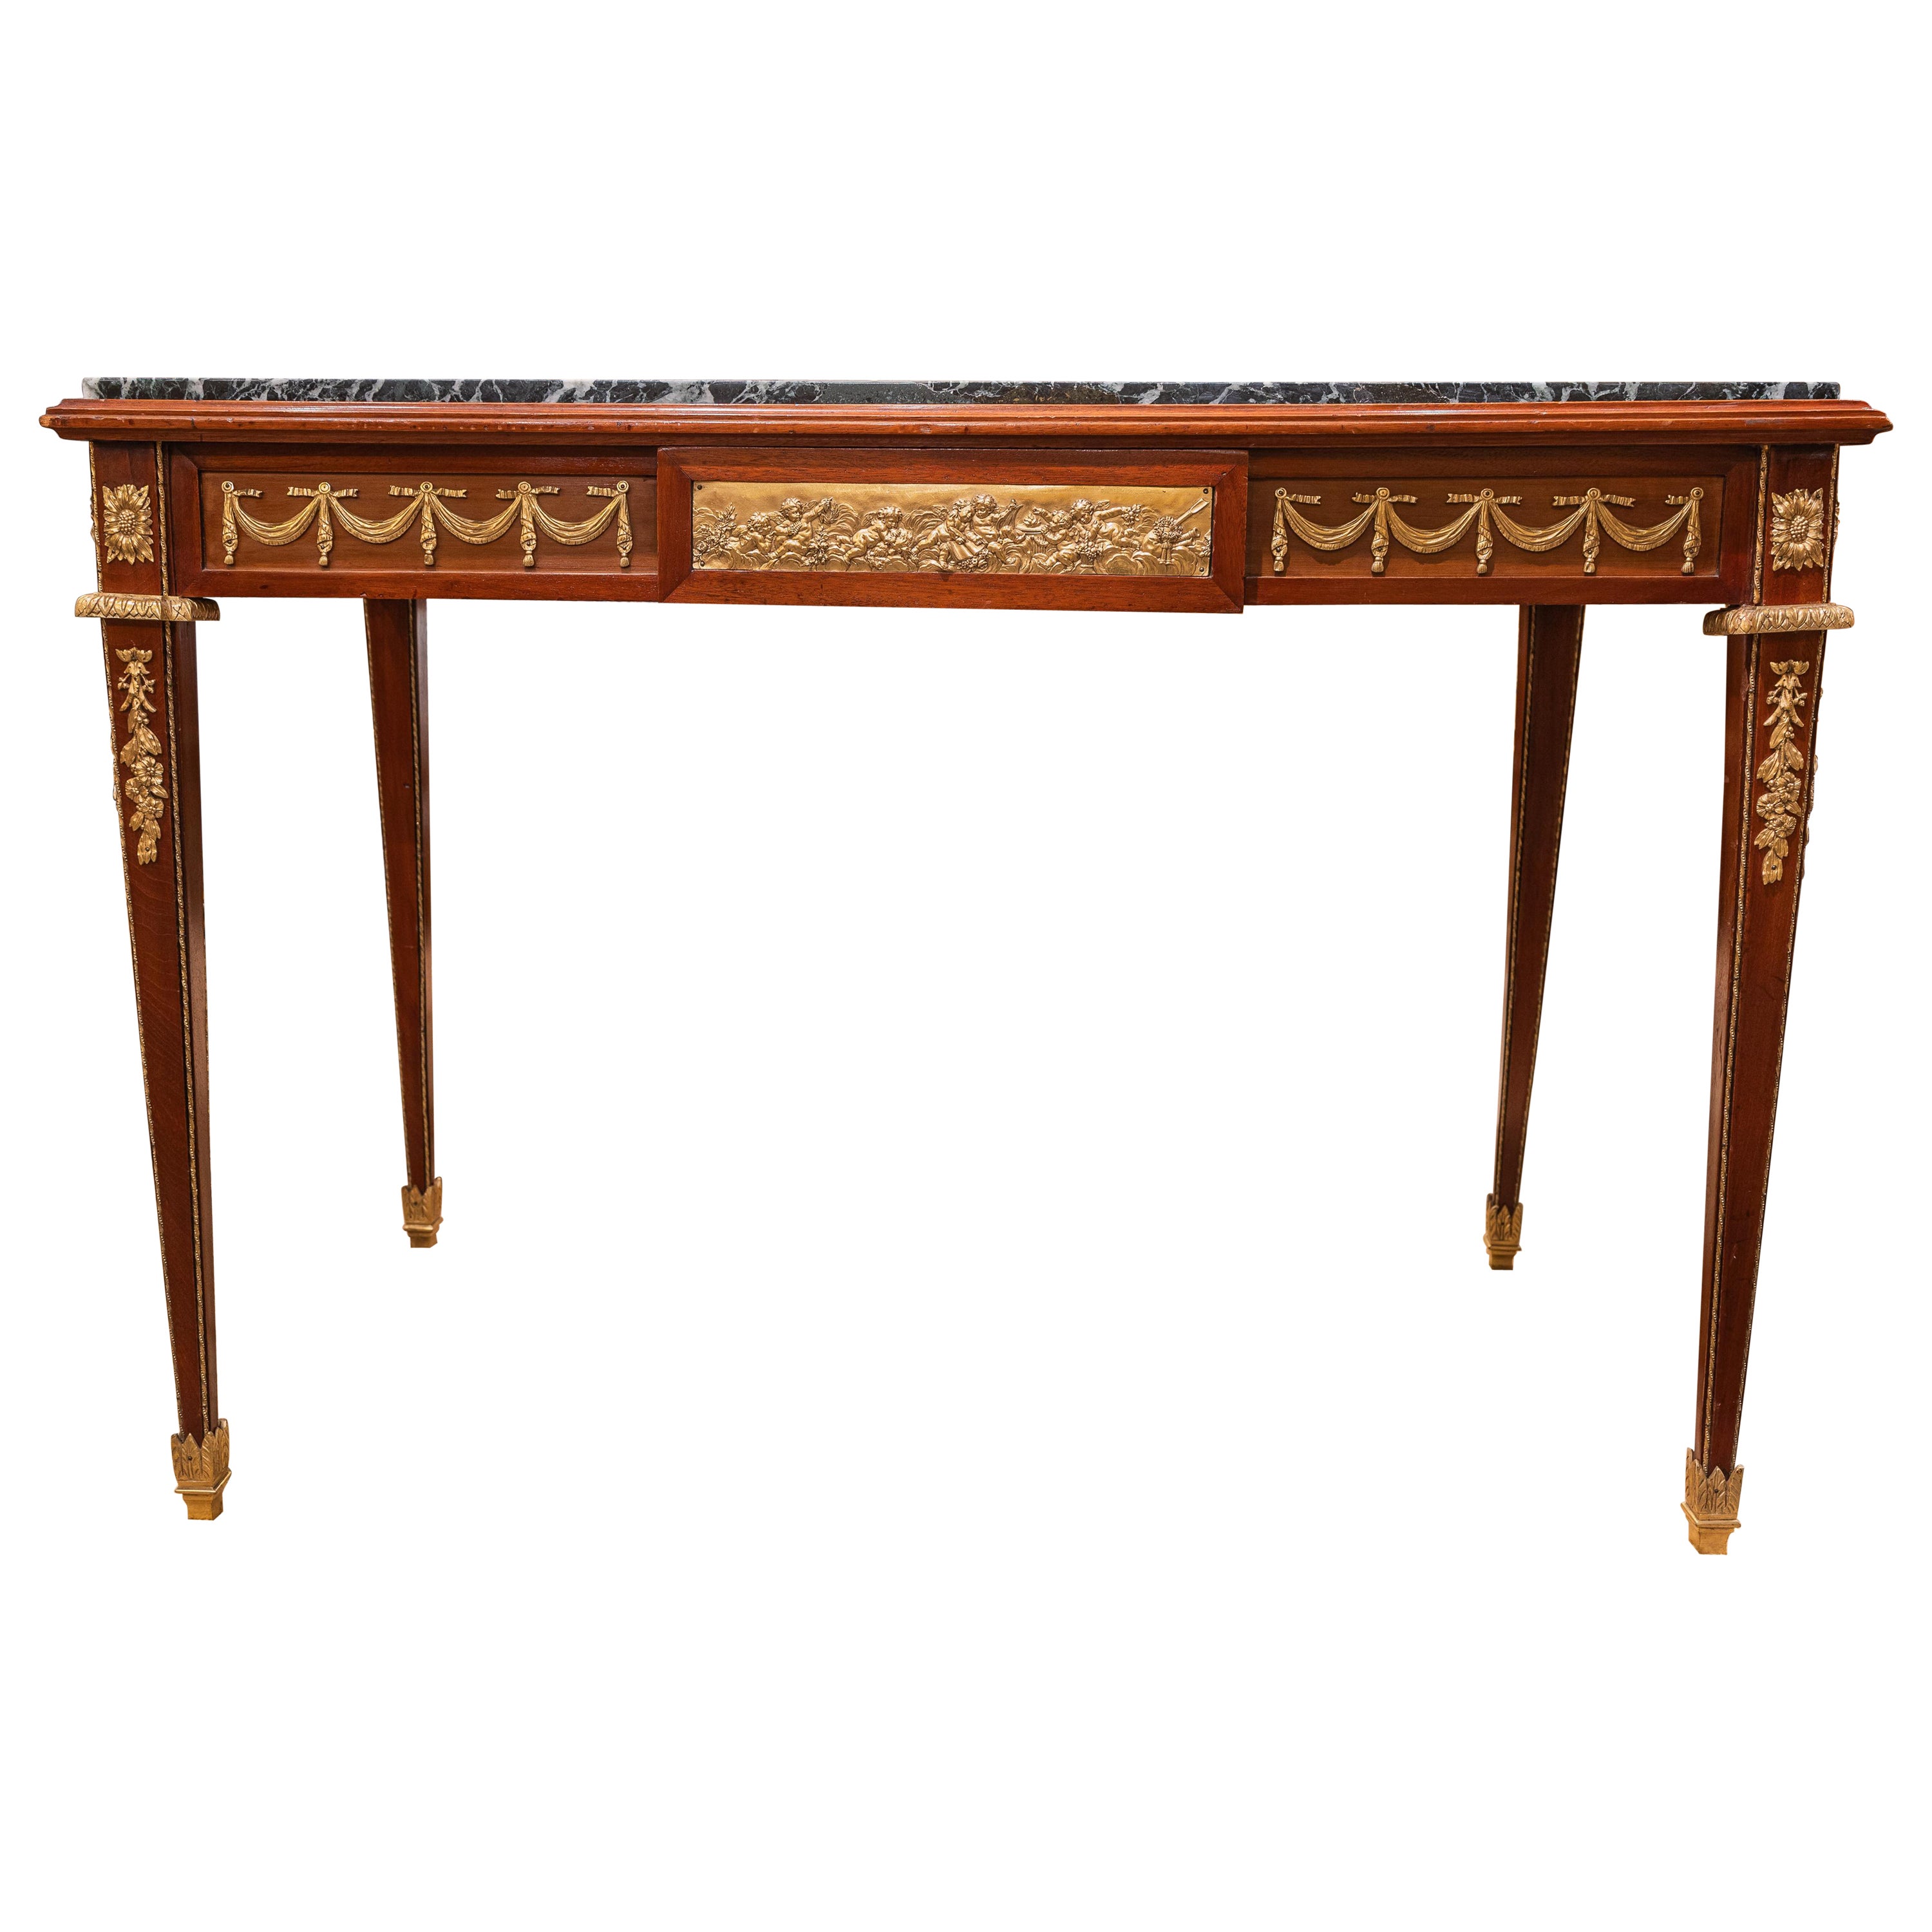 A fine 19th c French Louis XVI center table with fine gilt bronze mounts by Kahn